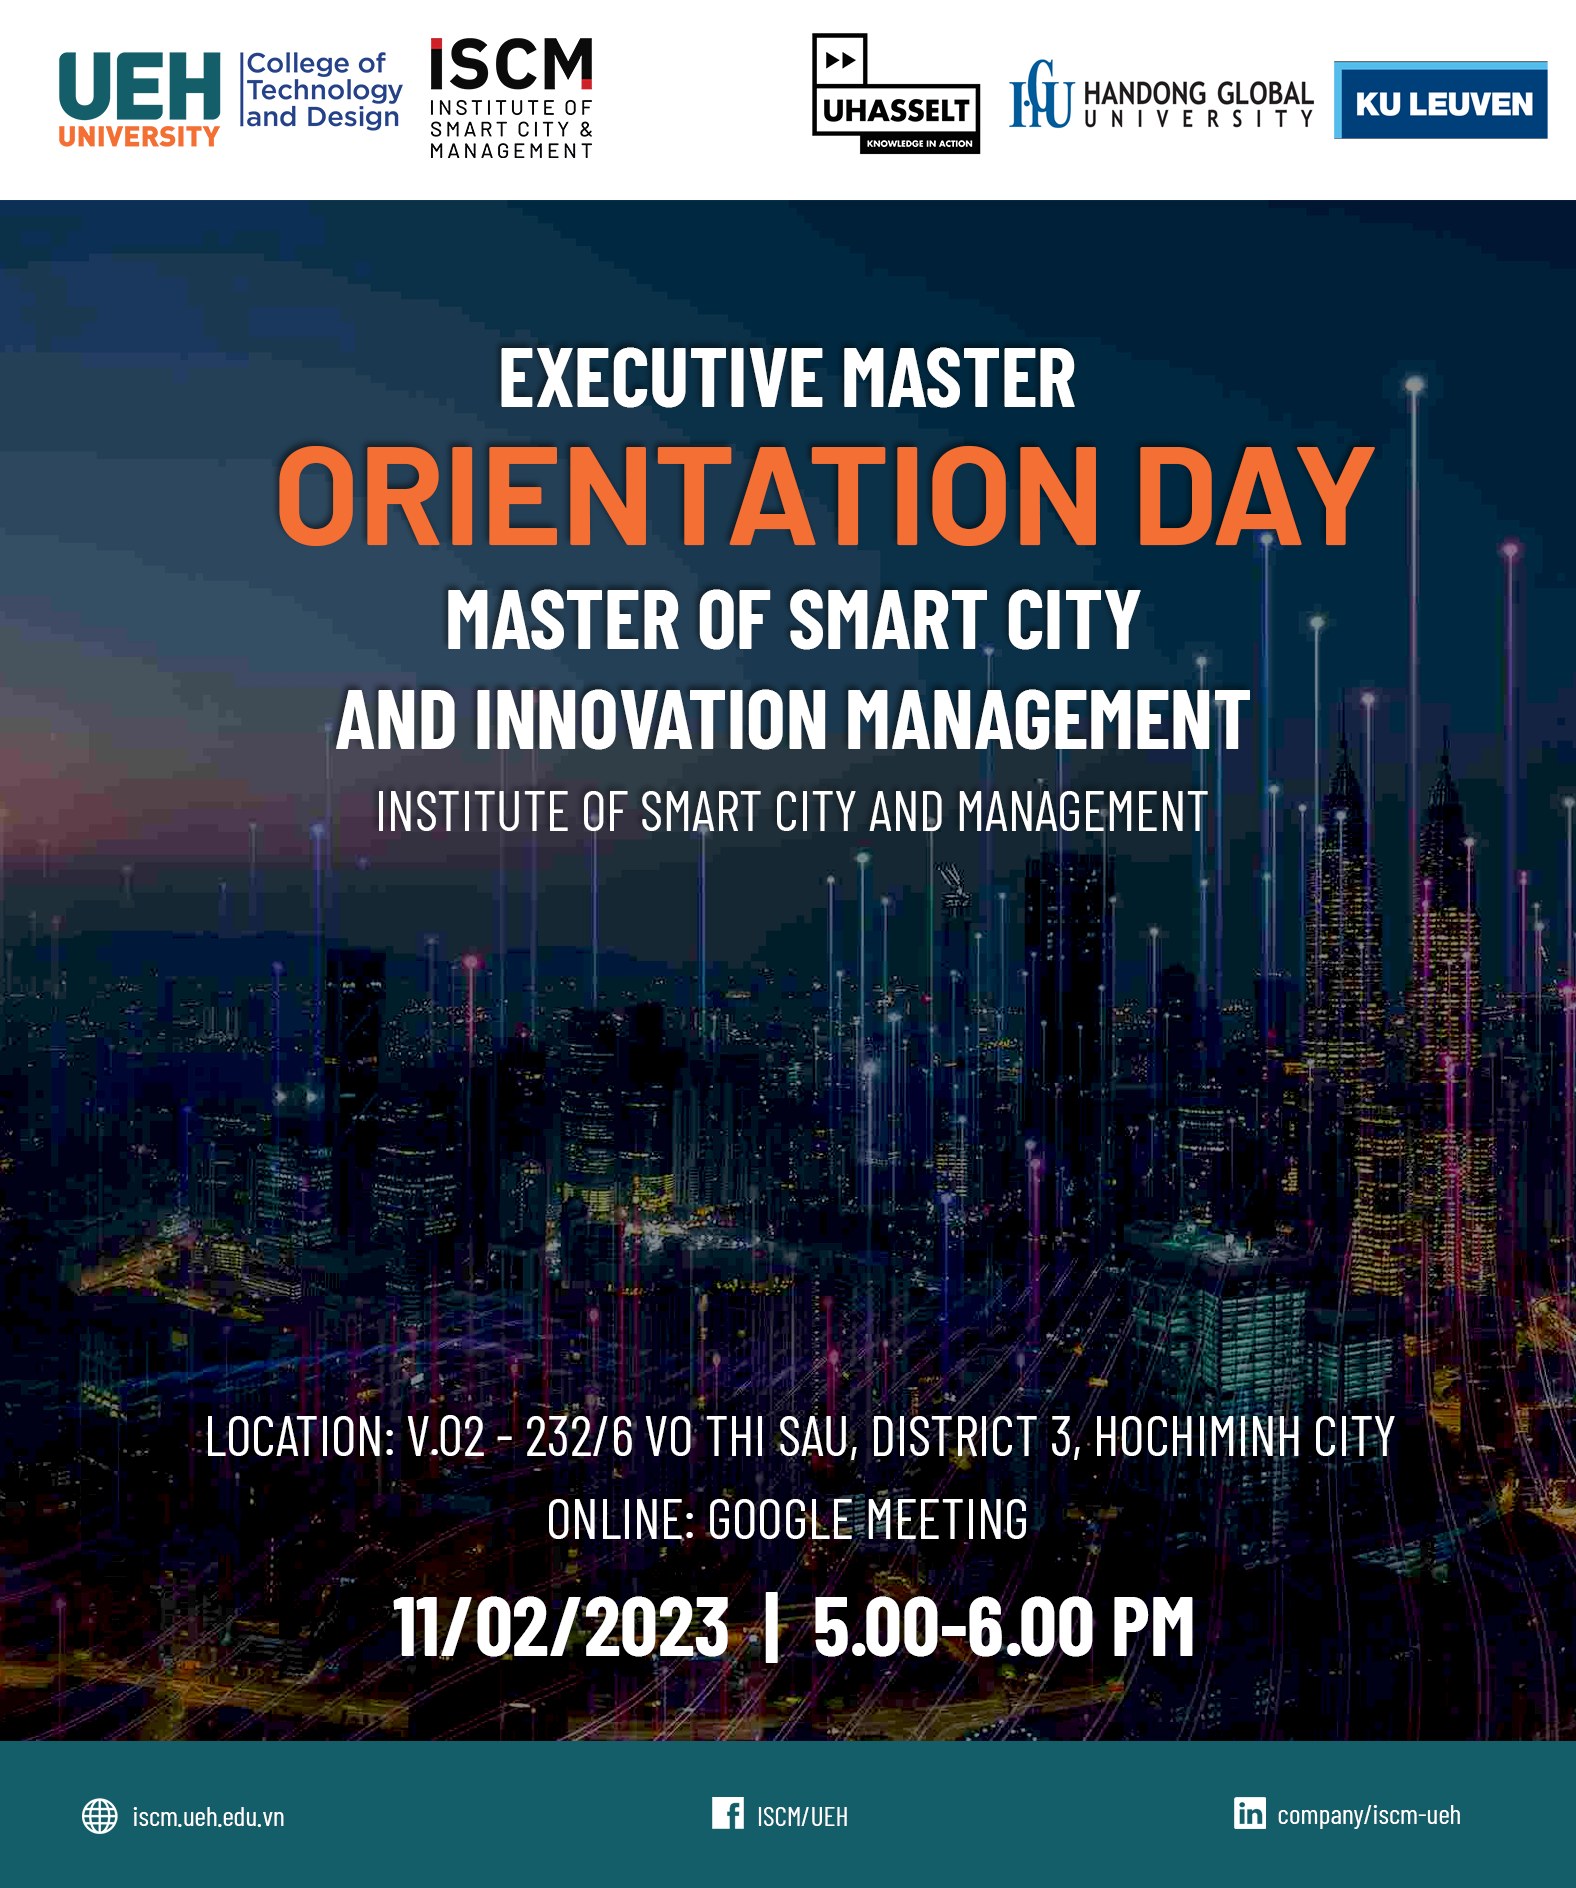 MASTER ORIENTATION DAY - A SPECIAL GREETING FOR THE MASTER OF SMART CITY AND INNOVATION MANAGEMENT